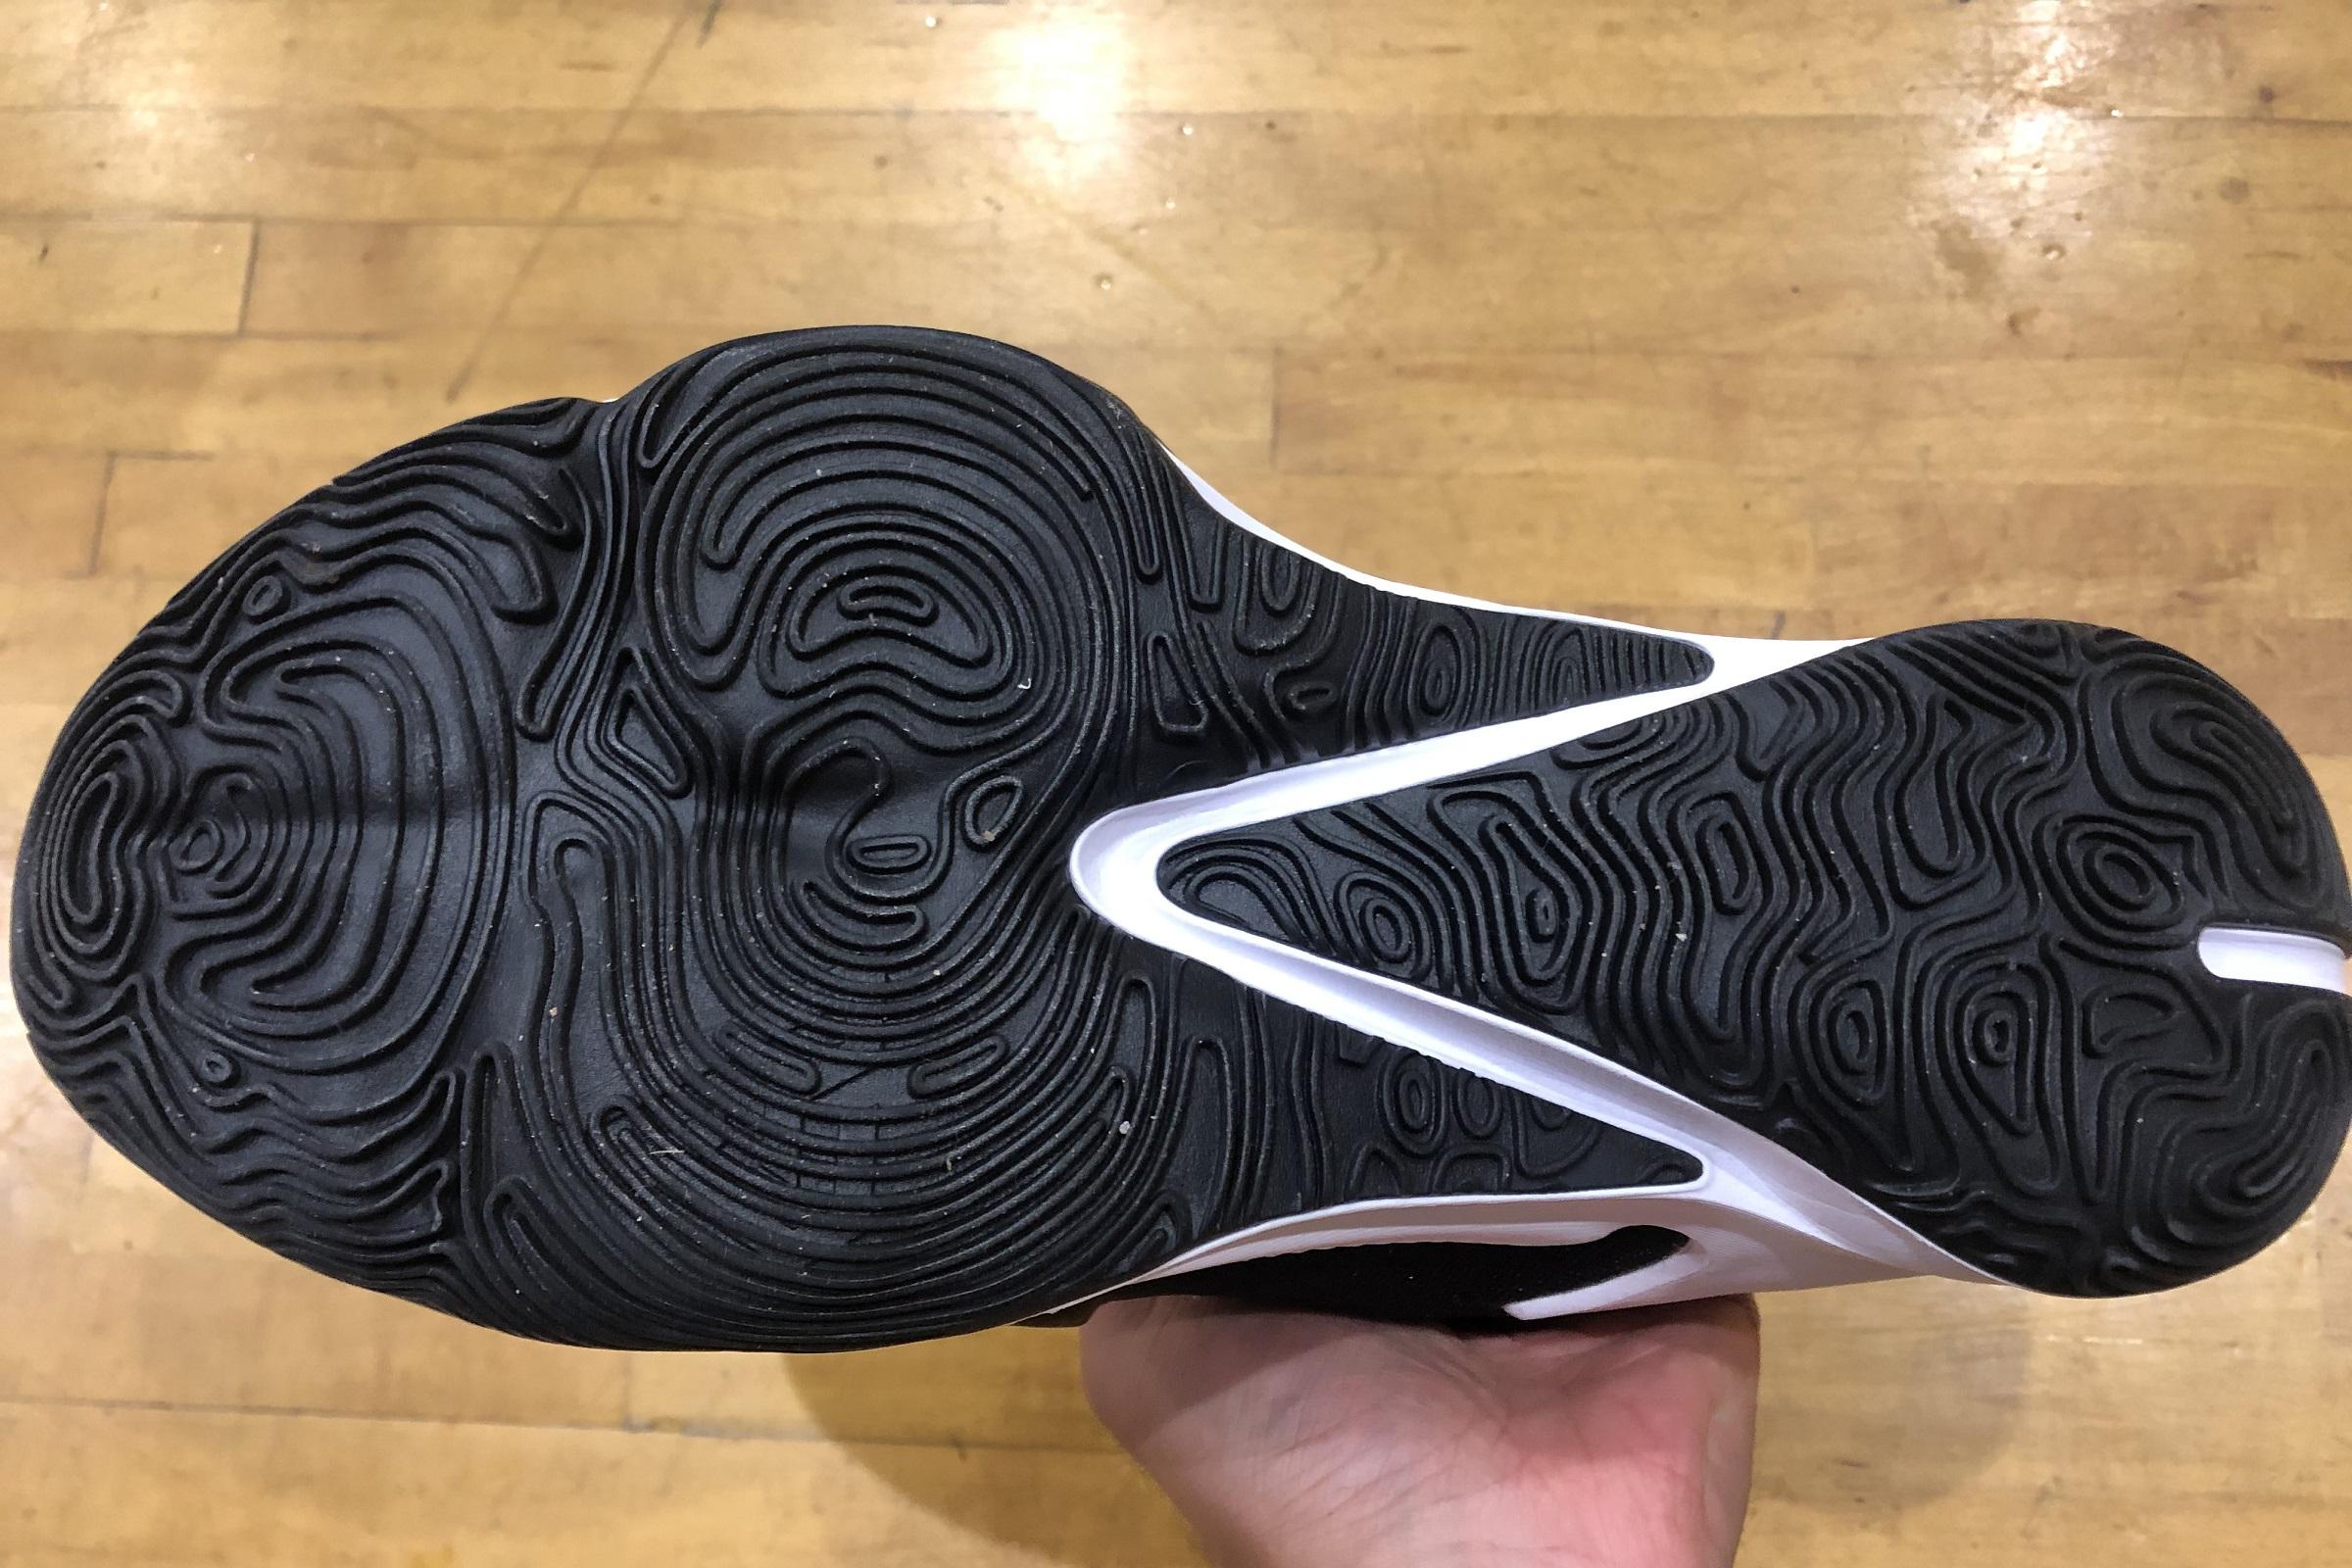 Nike Zoom Freak 3 Review, Facts, Comparison | RunRepeat